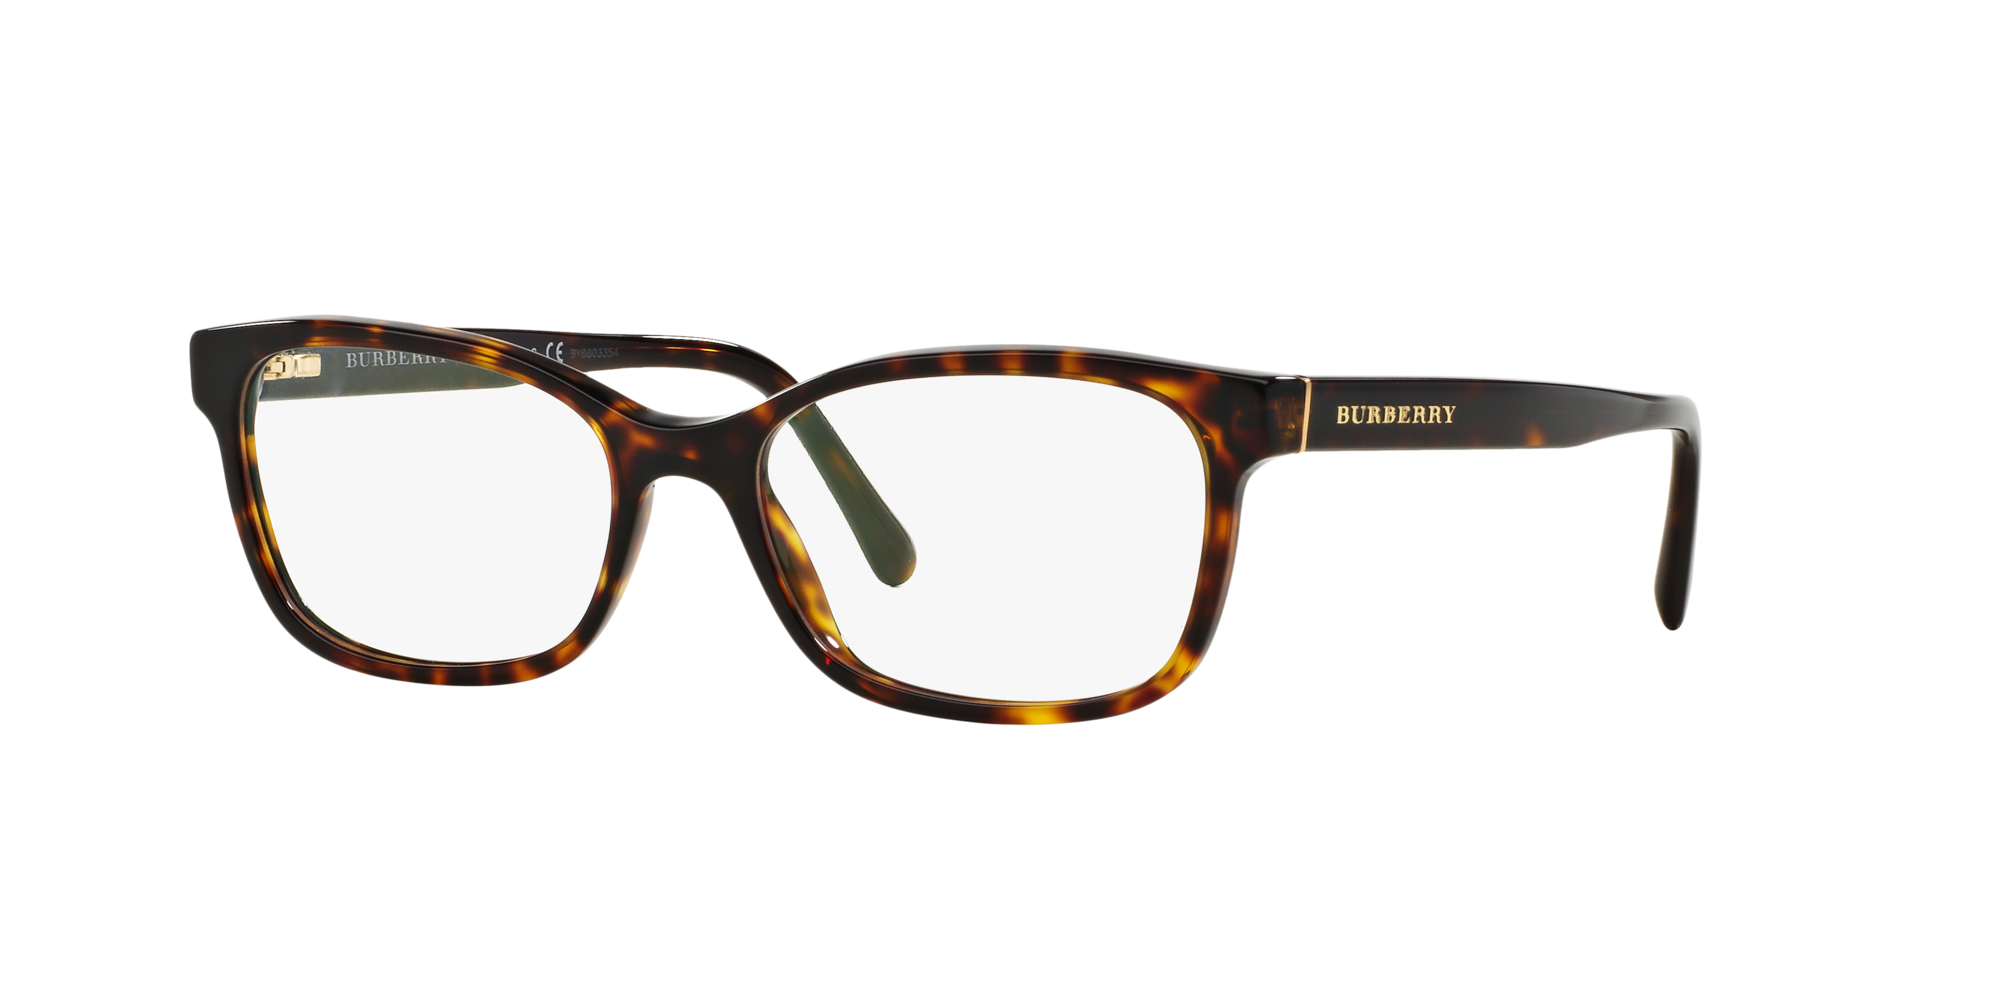 lenscrafters burberry